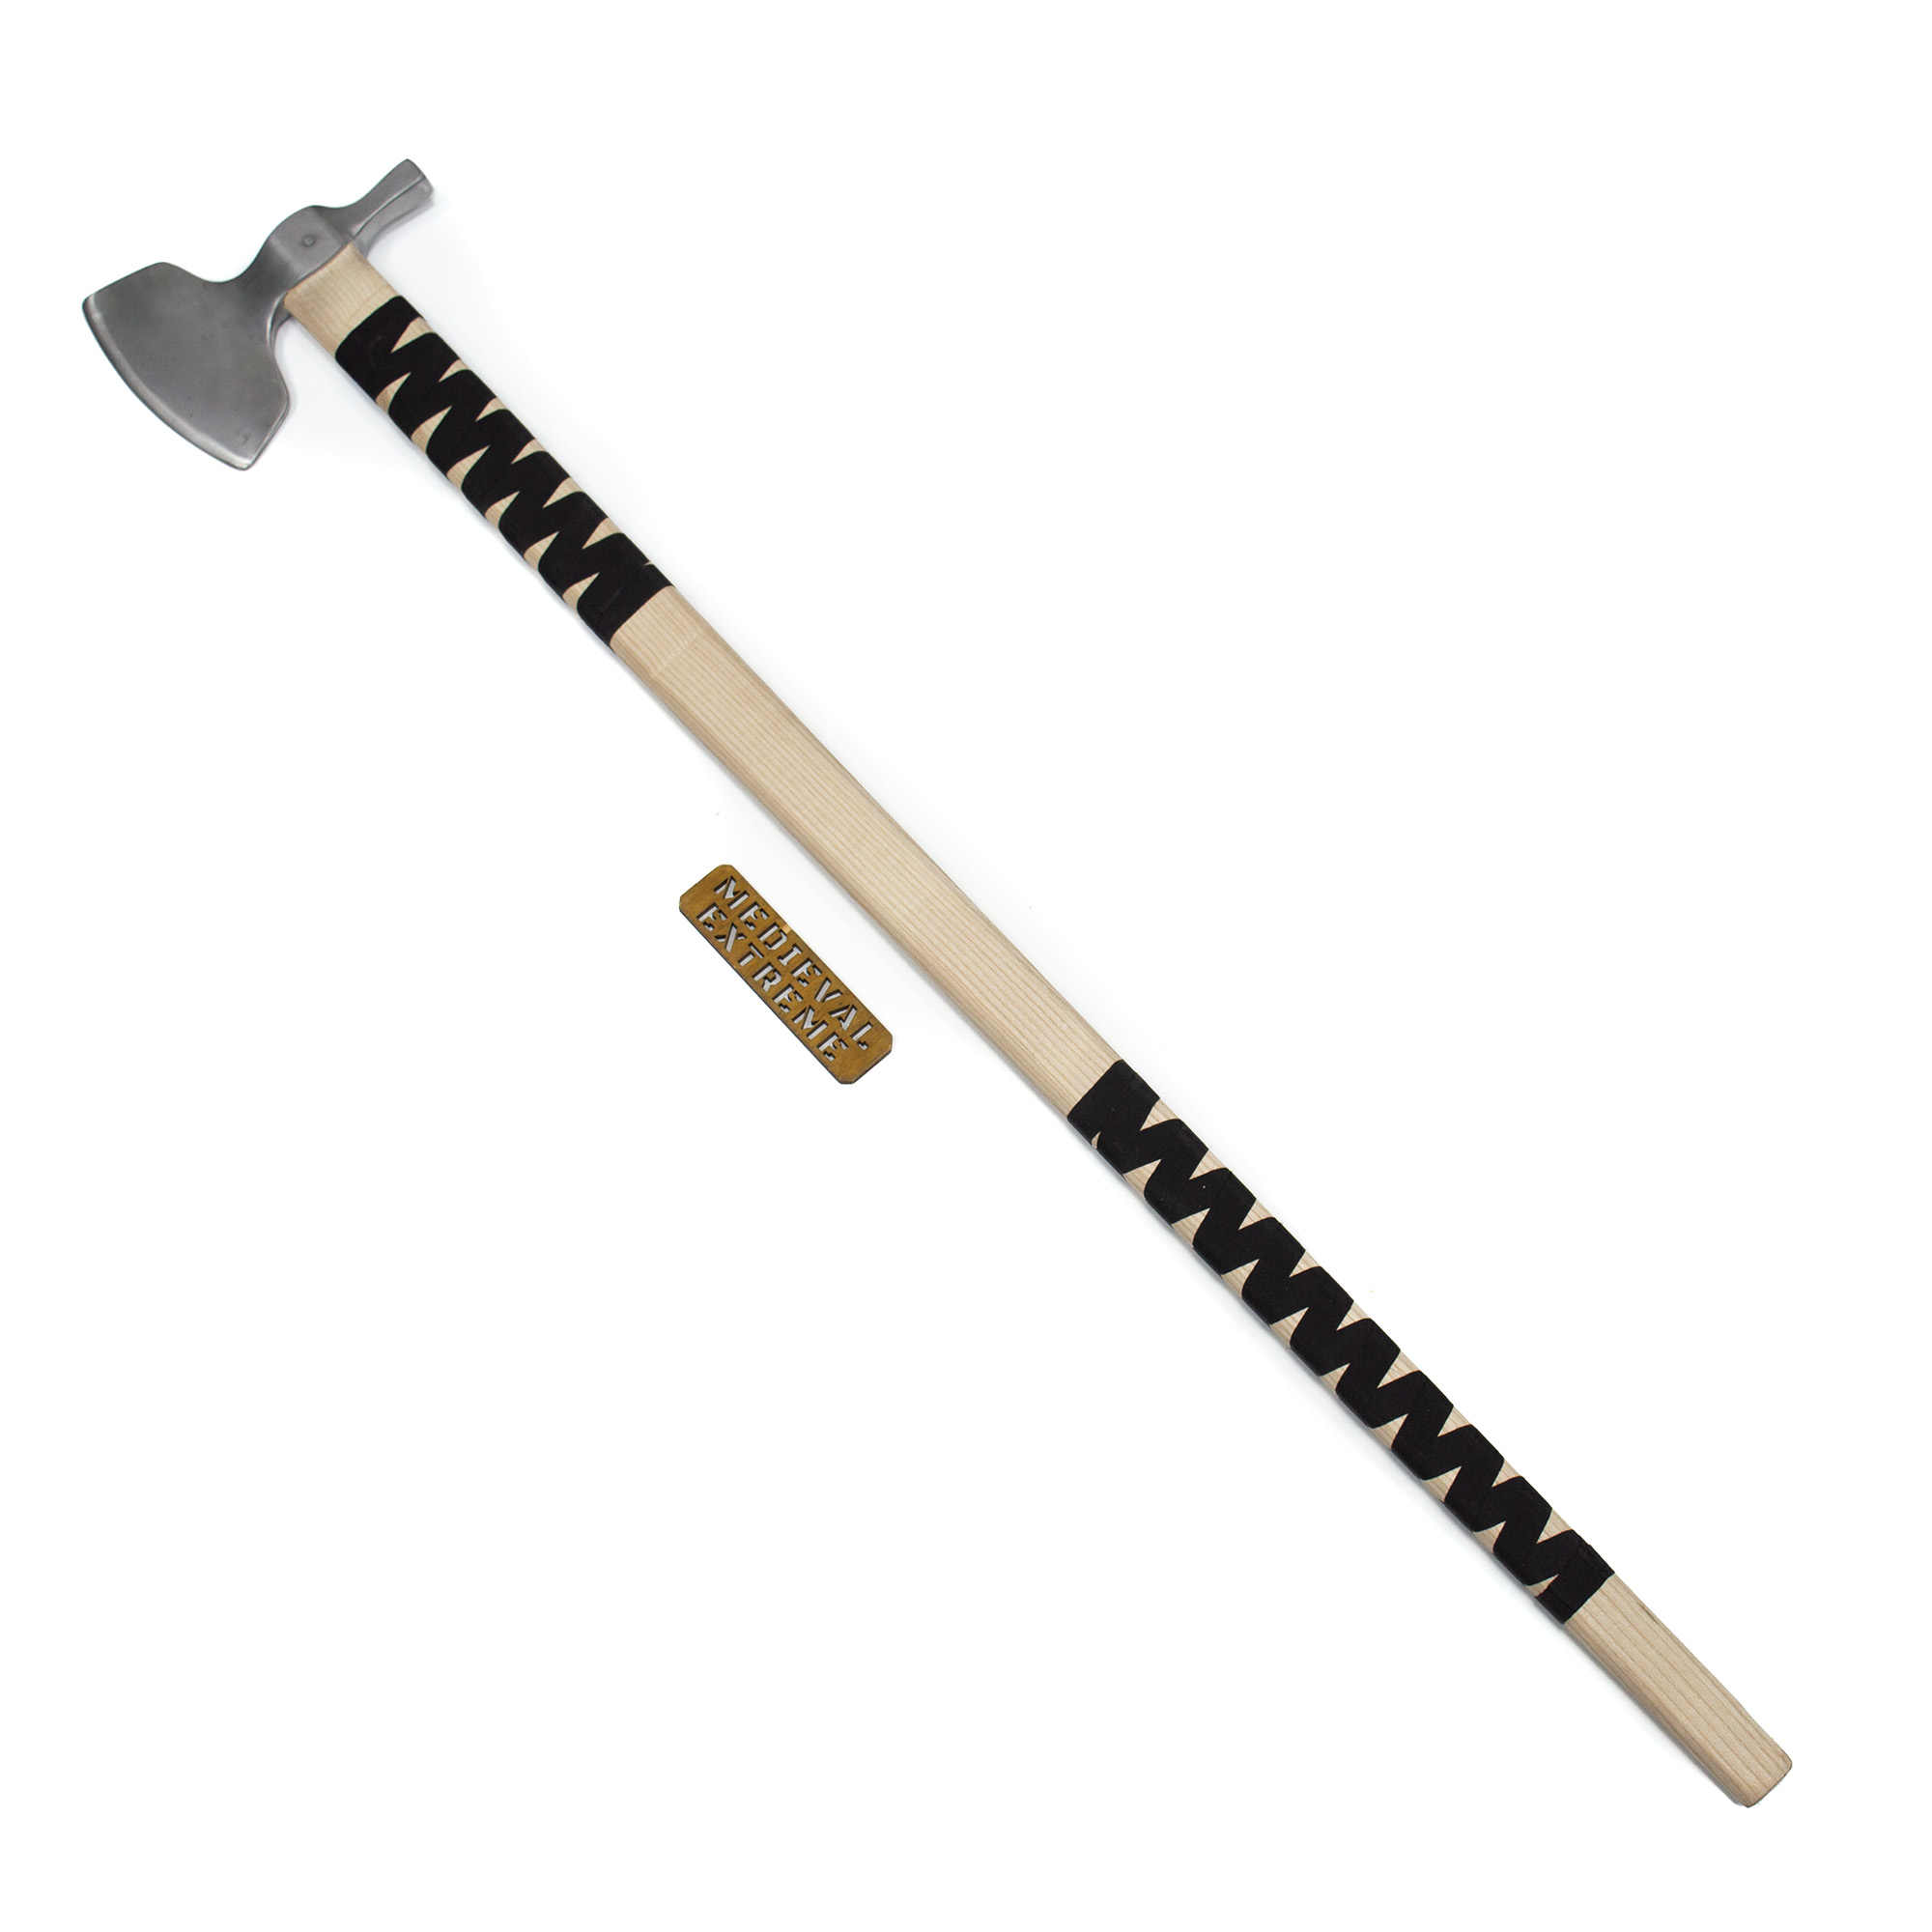 Long axe for armored combat with hammerhead